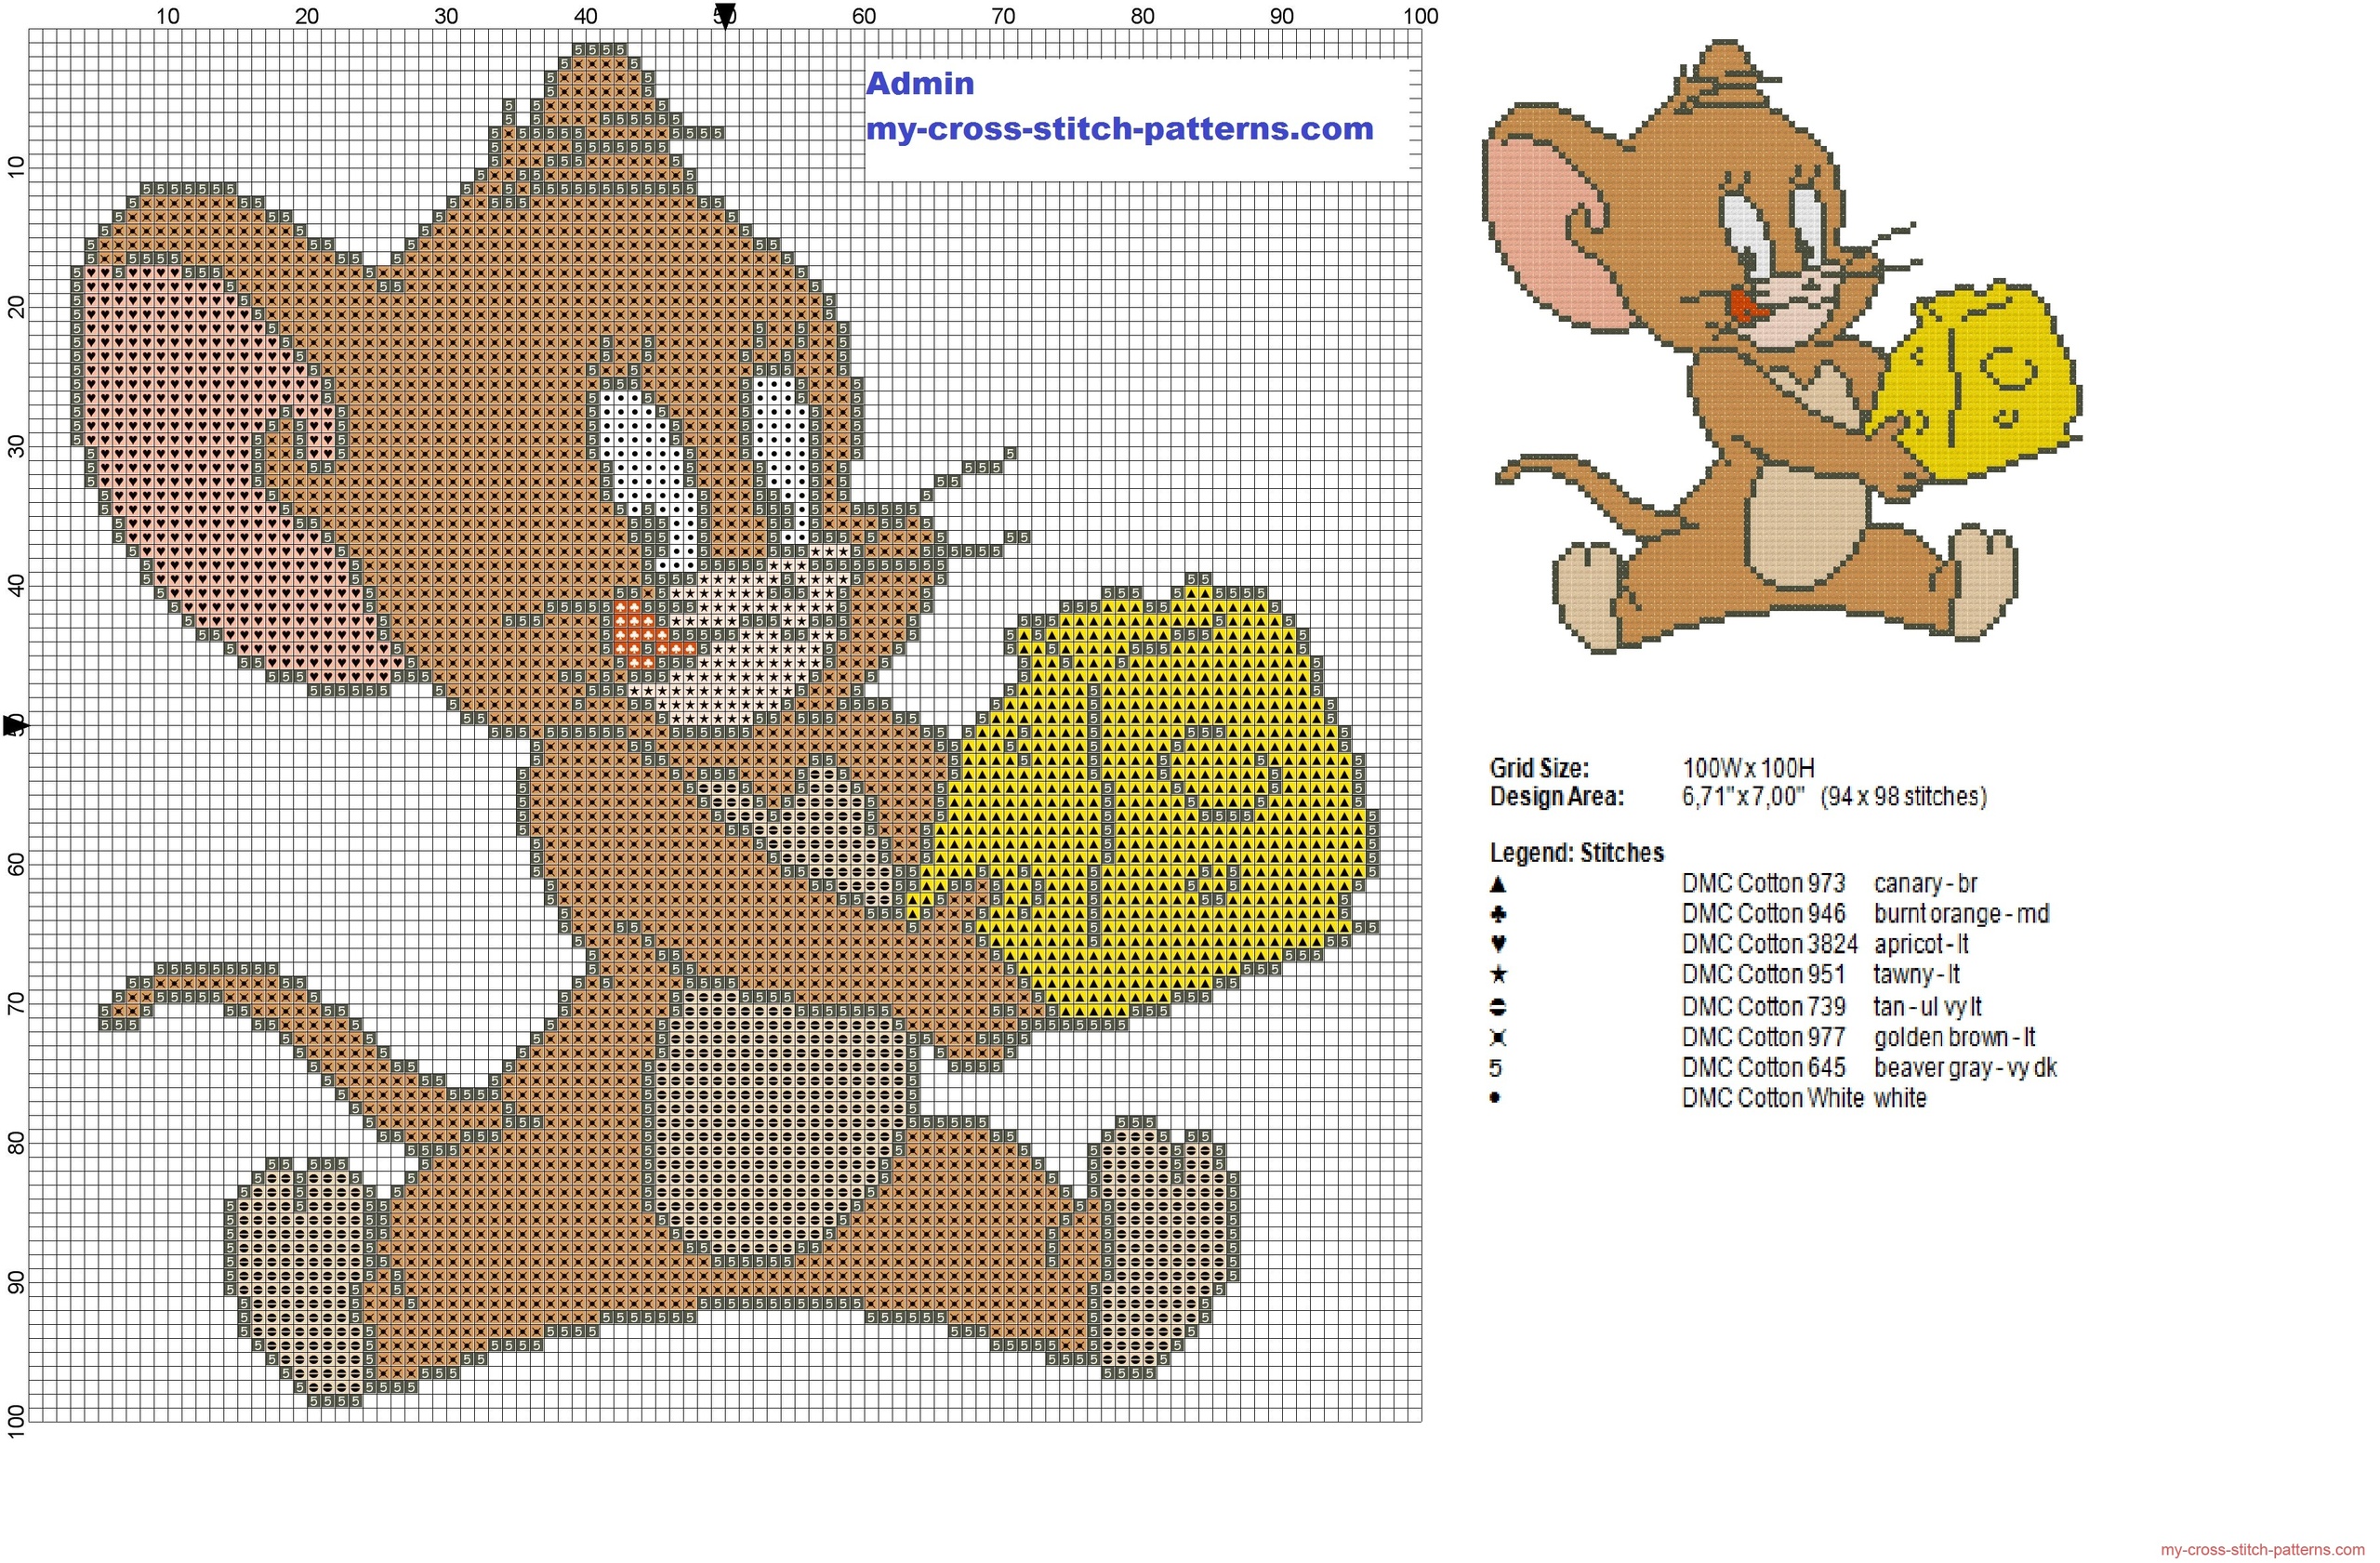 jerry_is_running_with_cheese_from_tom_and_jerry_cross_stitch_pattern